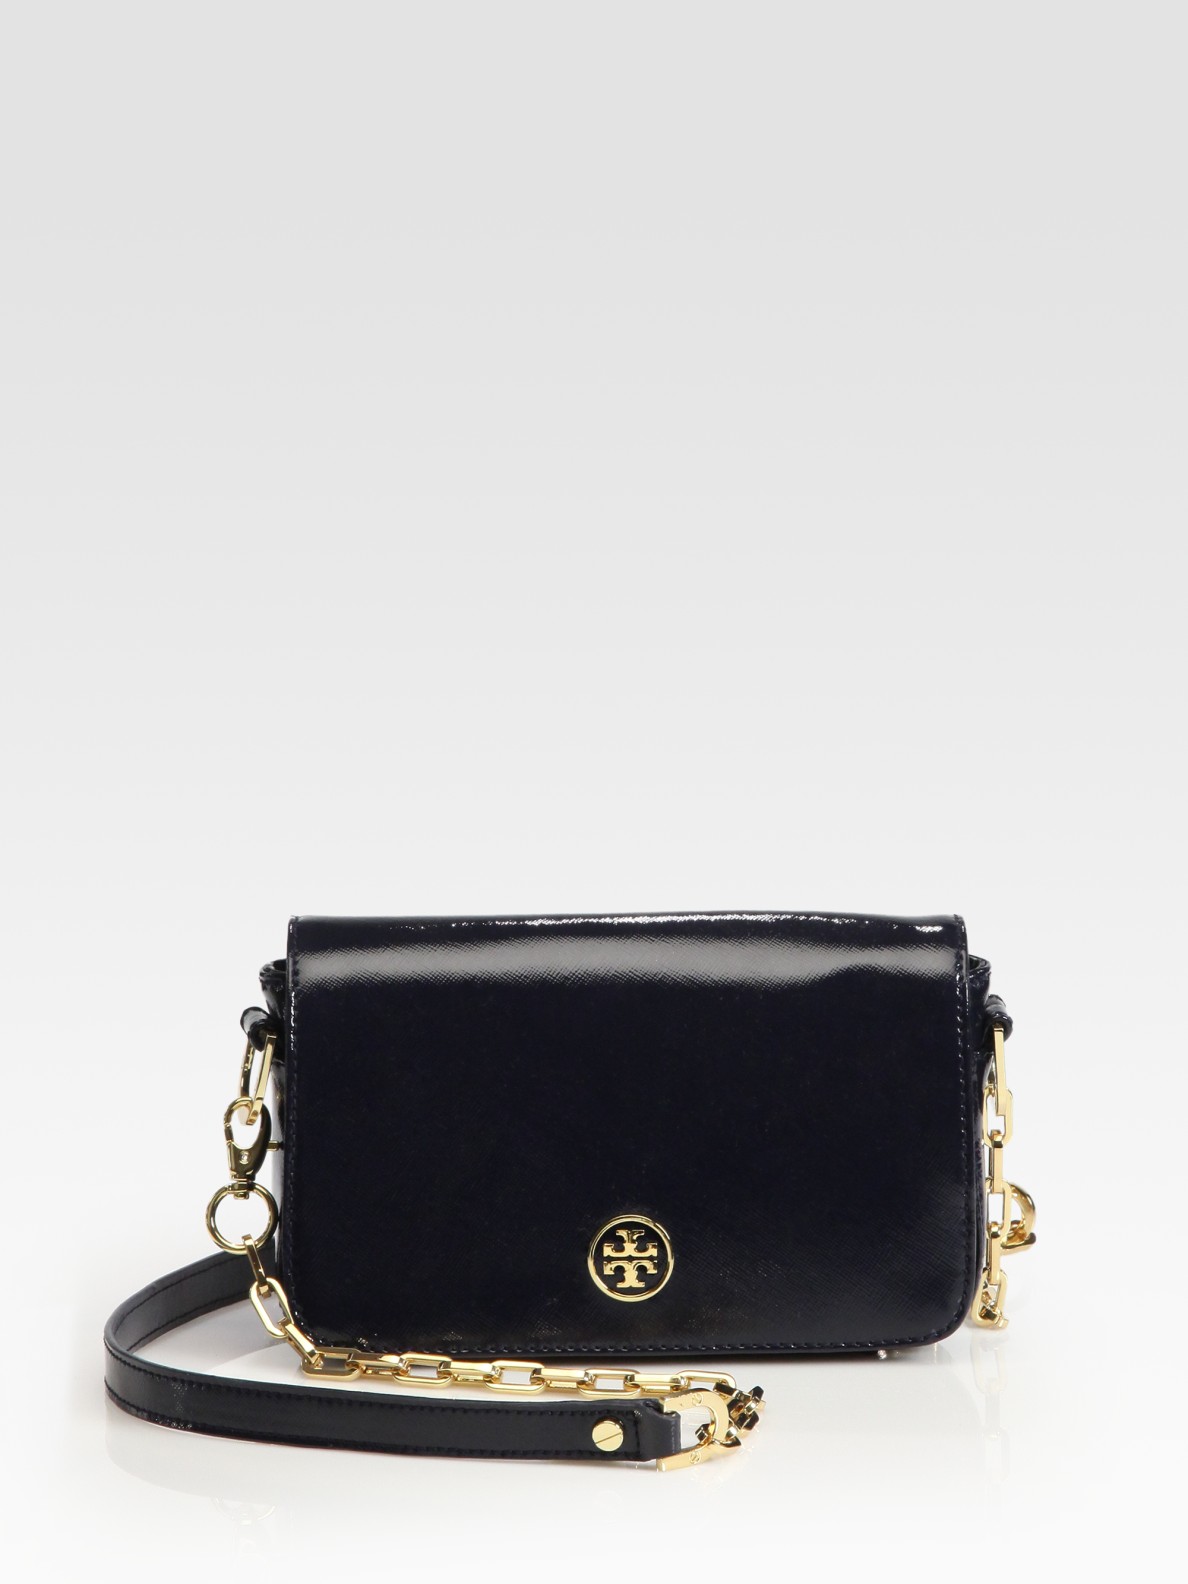 Tory burch Robinson Mini Patent Leather Shoulder Bag in Black | Lyst